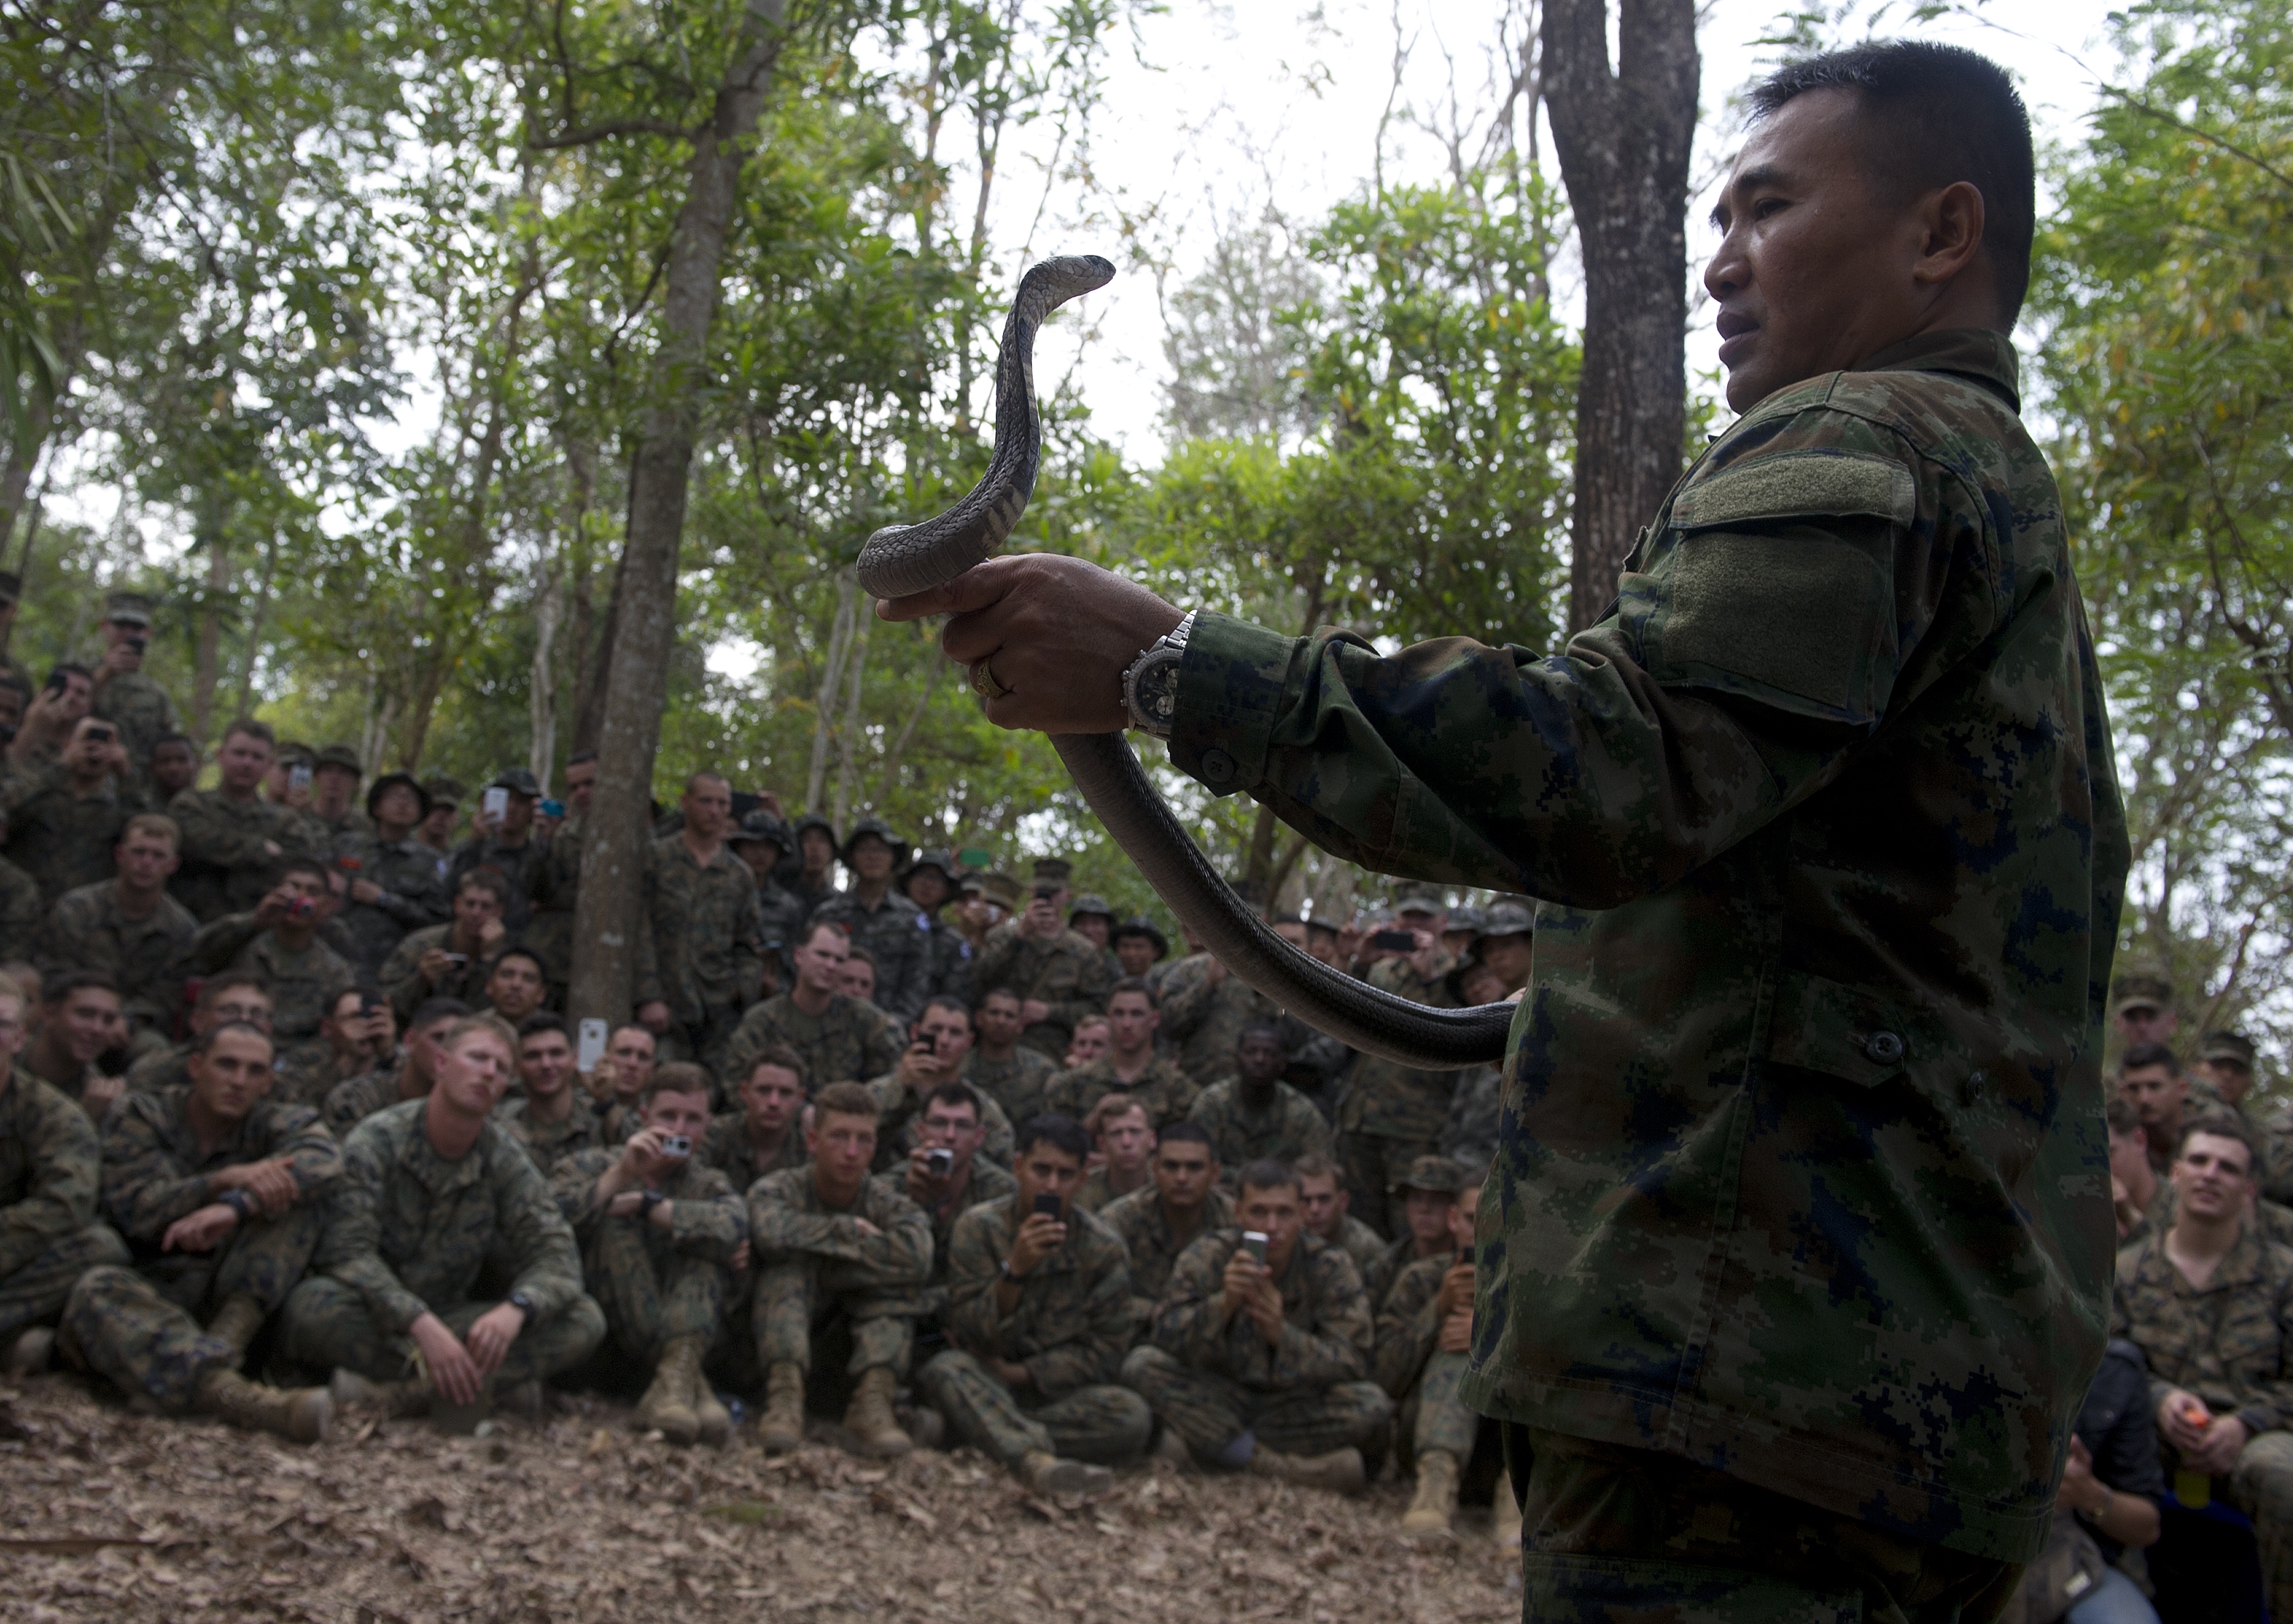 A Thai Marine shows how to catch a cobra as U.S. Marines look on during a jungle-survival program at a navy base in Chanthaburi province, Thailand, on Feb. 15, 2014 (Pornchai Kittiwongsakul—AFP/Getty Images)